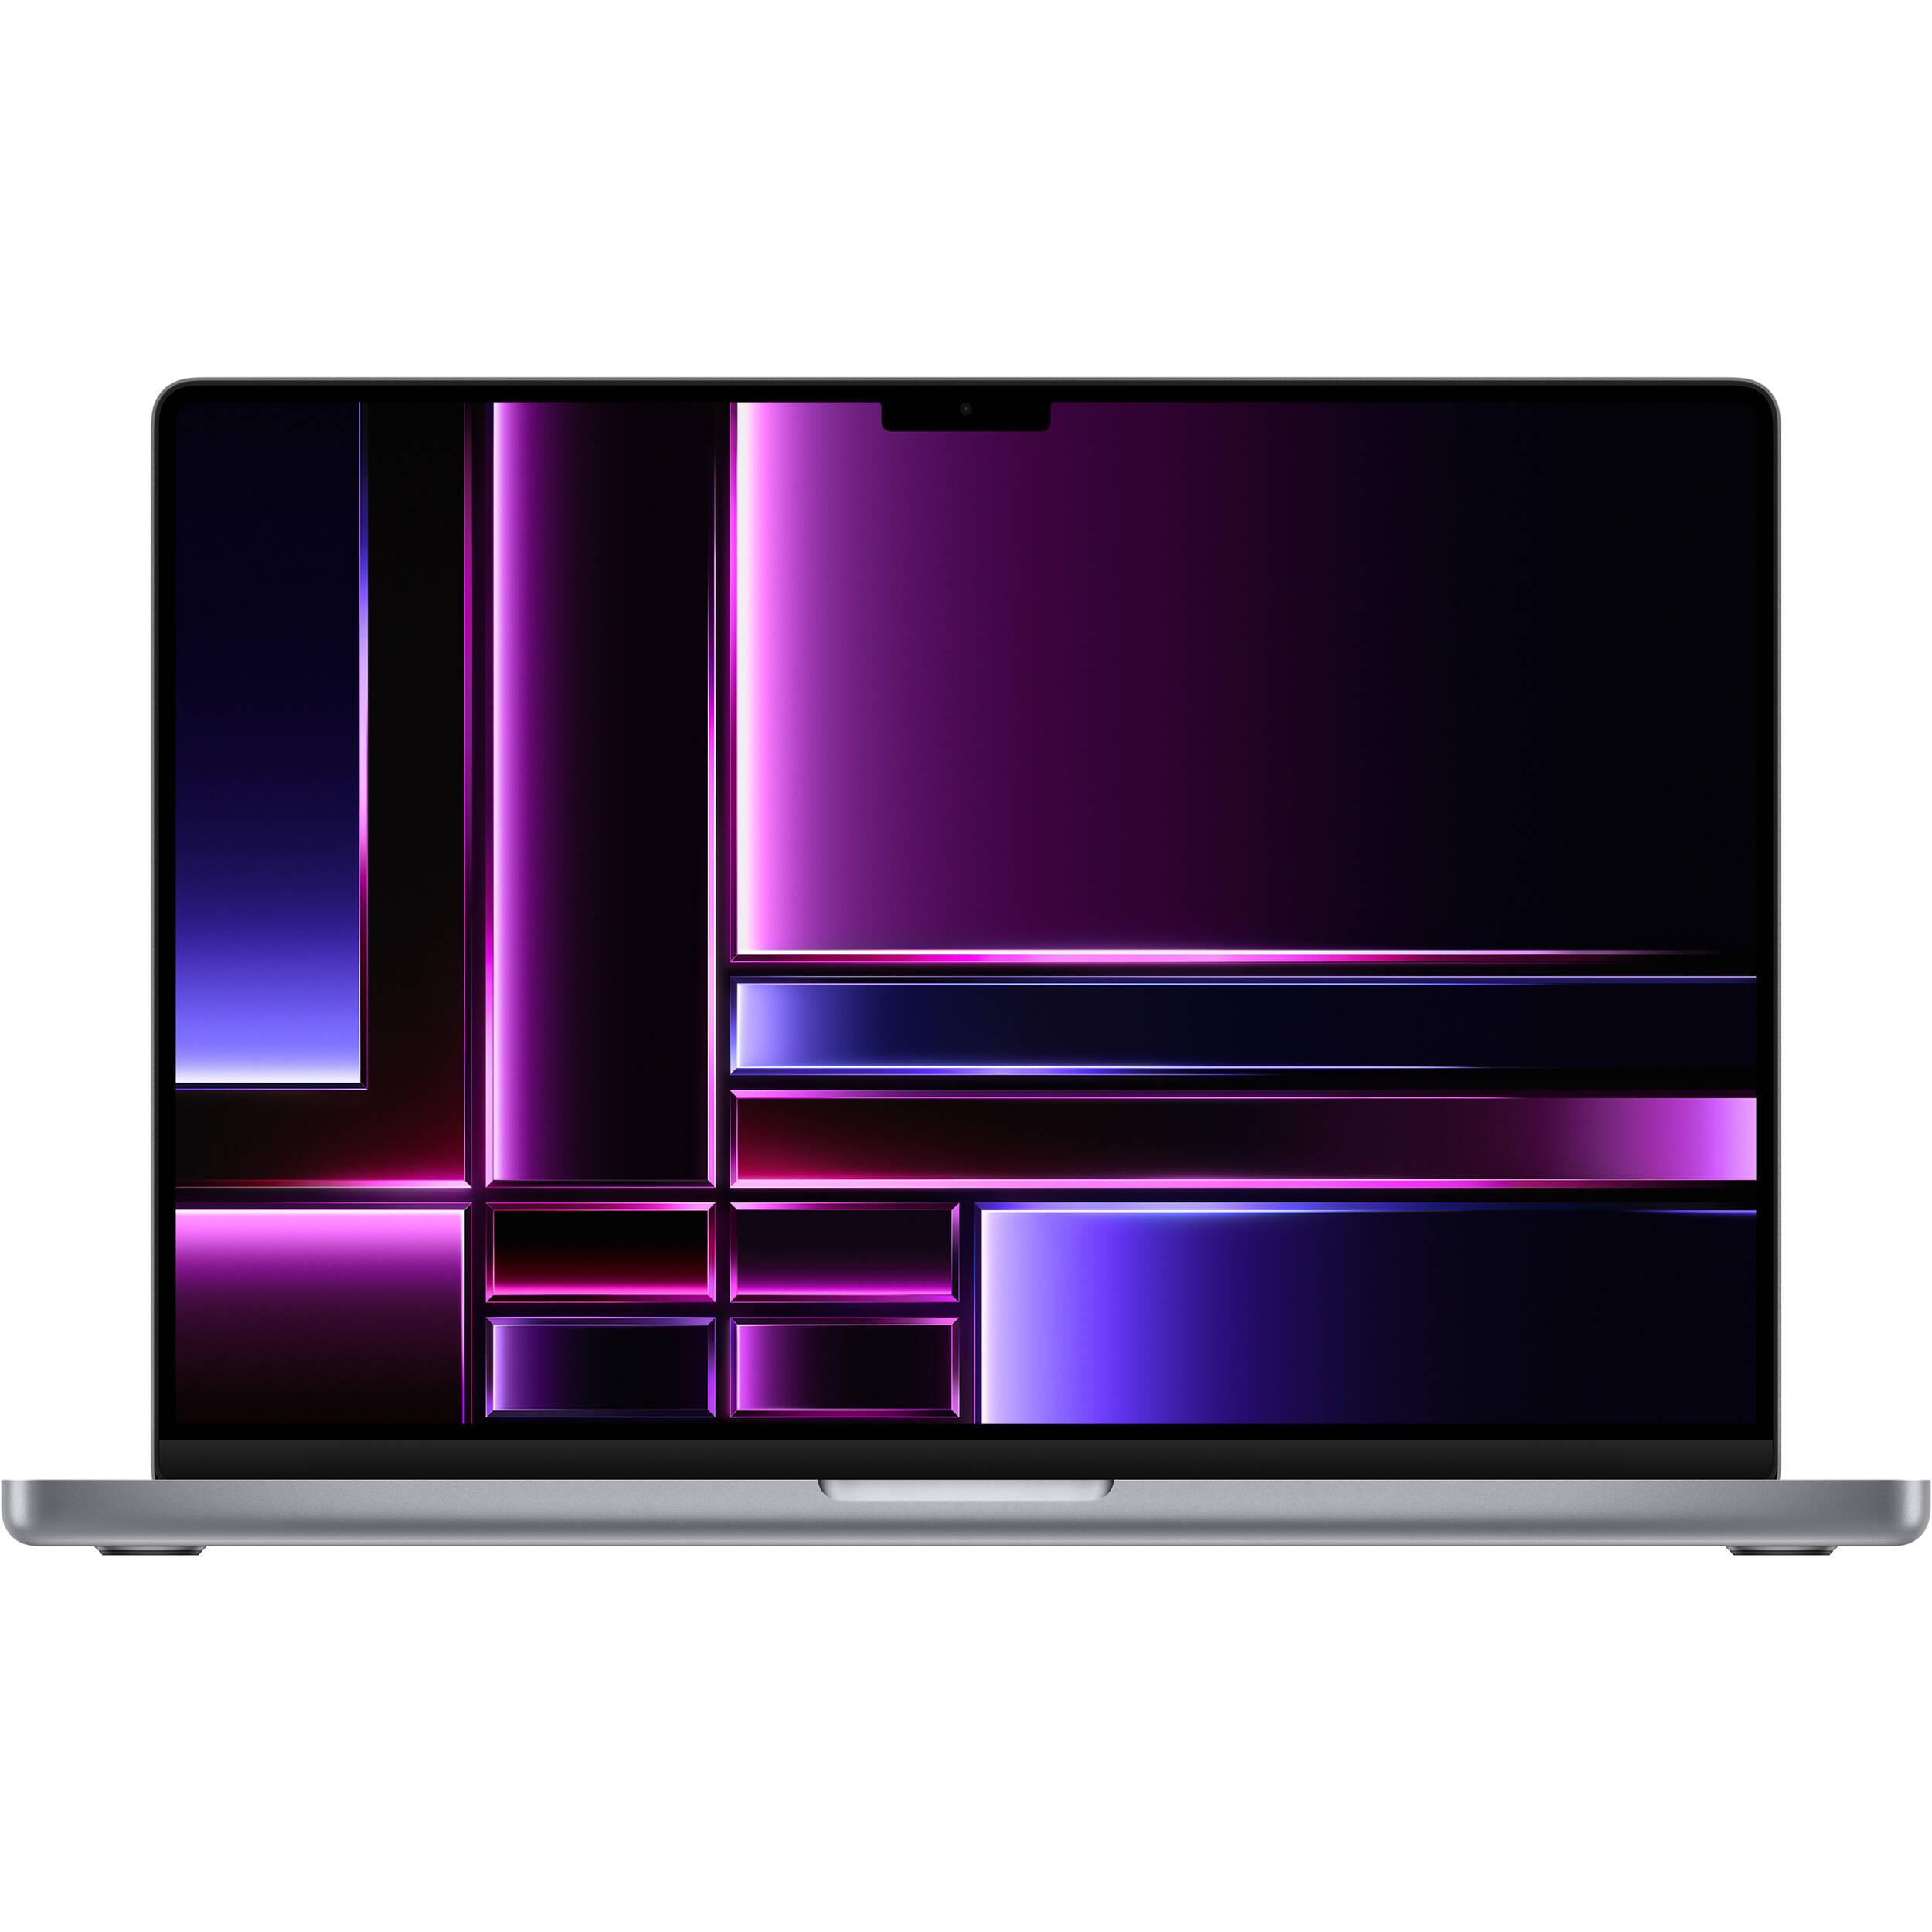 16-inch MacBook Pro: Apple M2 Max chip with 12core CPU and 38core GPU, 1TB SSD - Space Gray